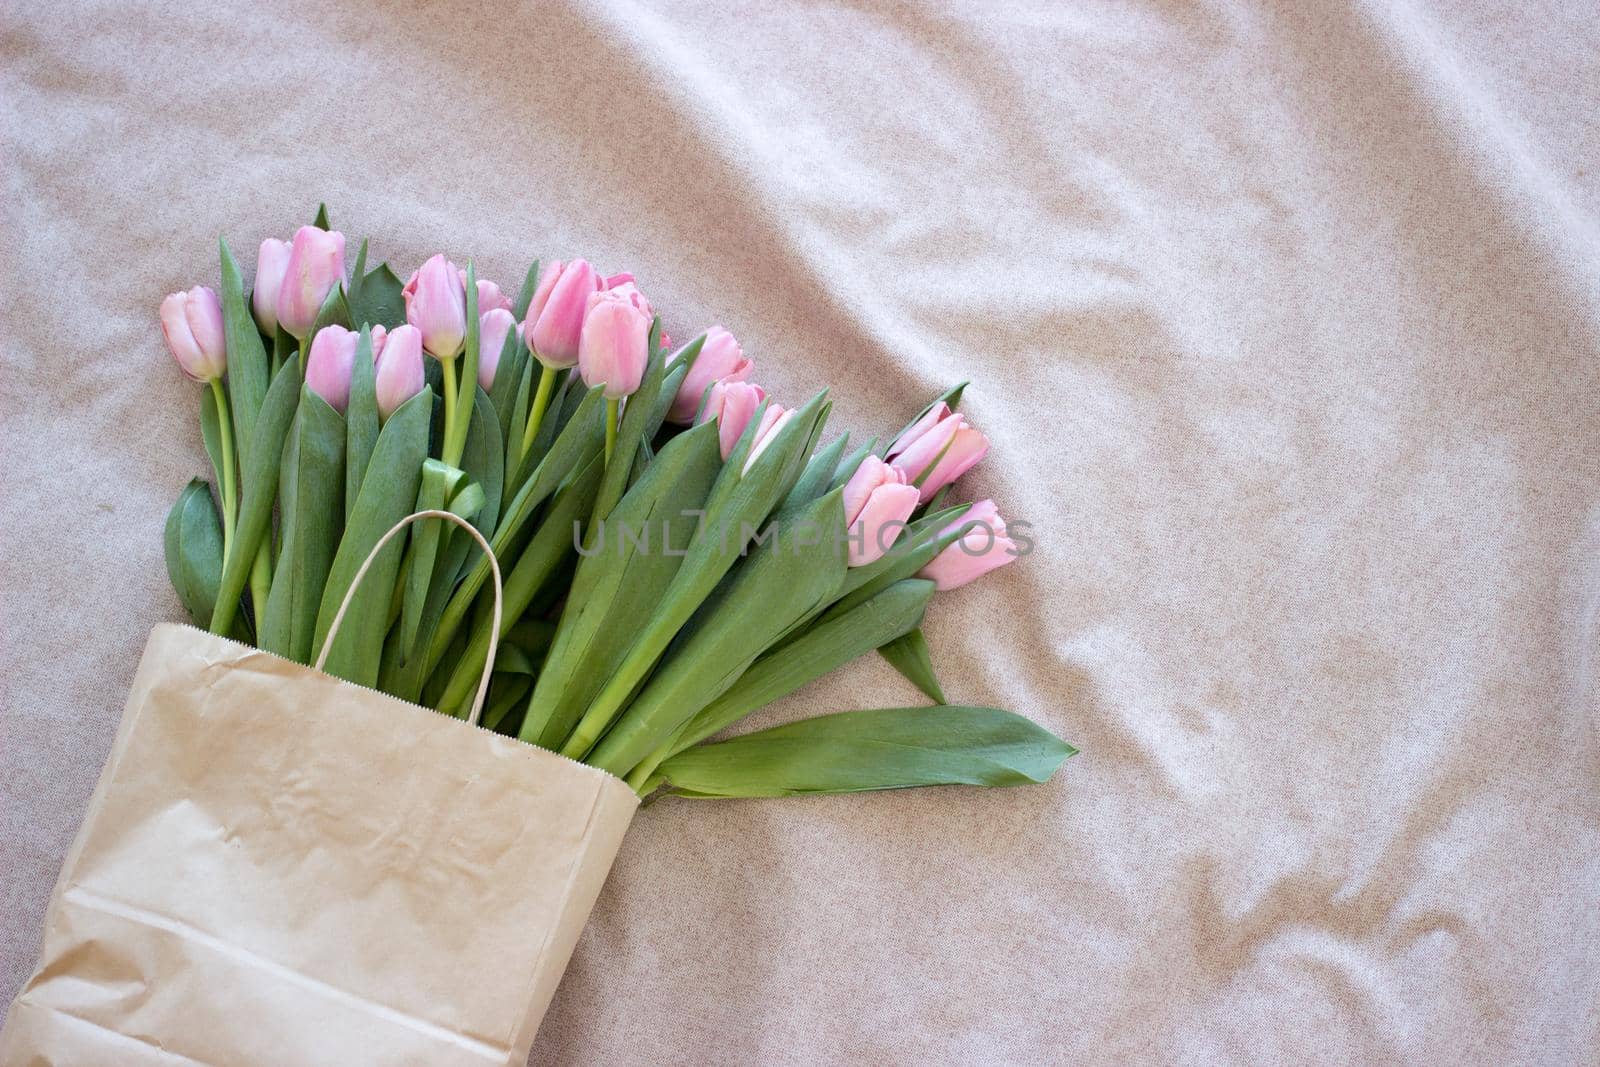 Fresh pink tulip flowers in paper bag on light background. Top view with copy space.